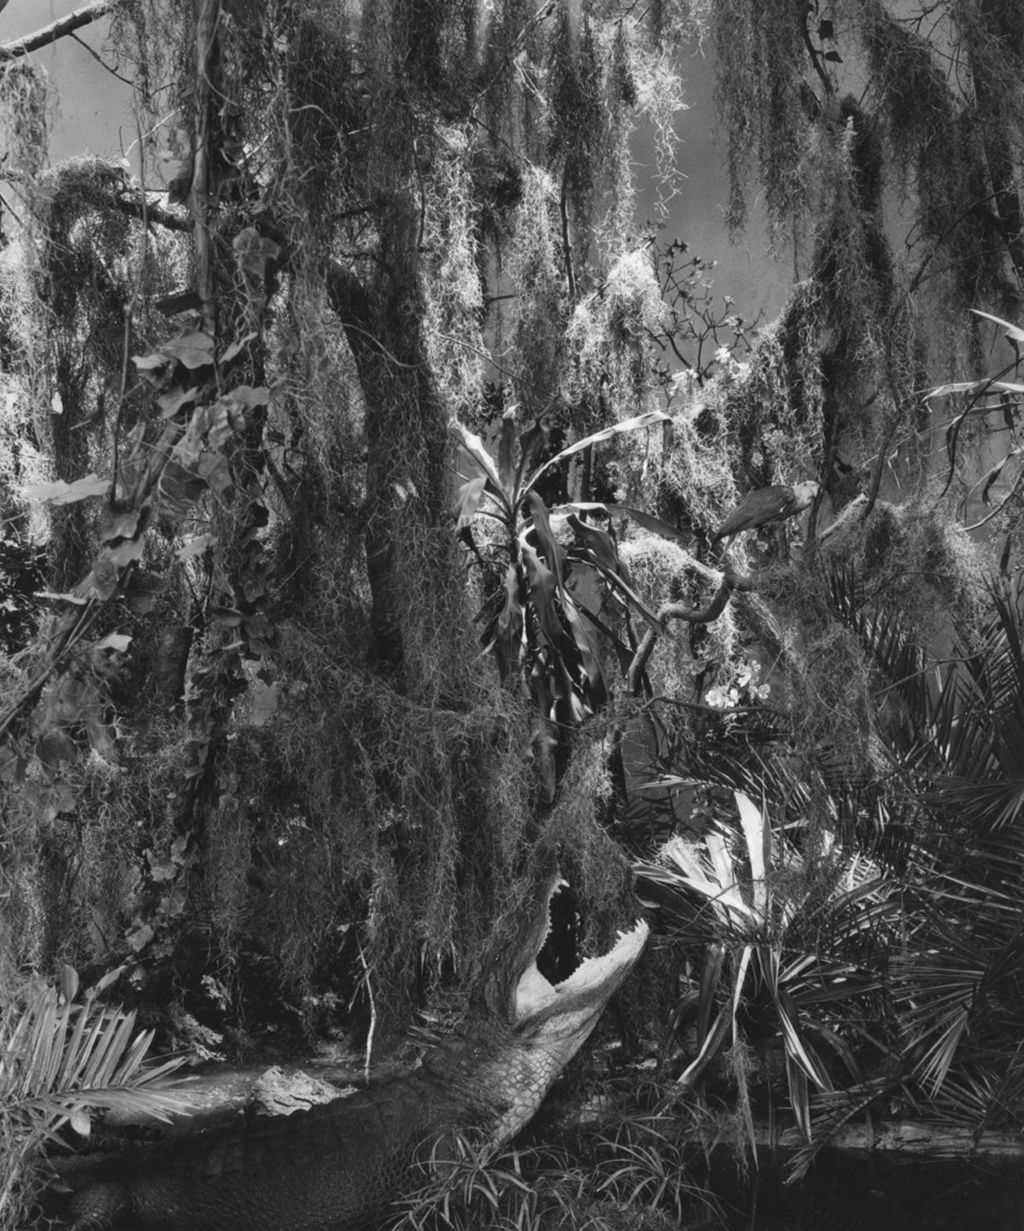 Miniature of Jungle scene at the Animal Behavior and the Environment exhibit